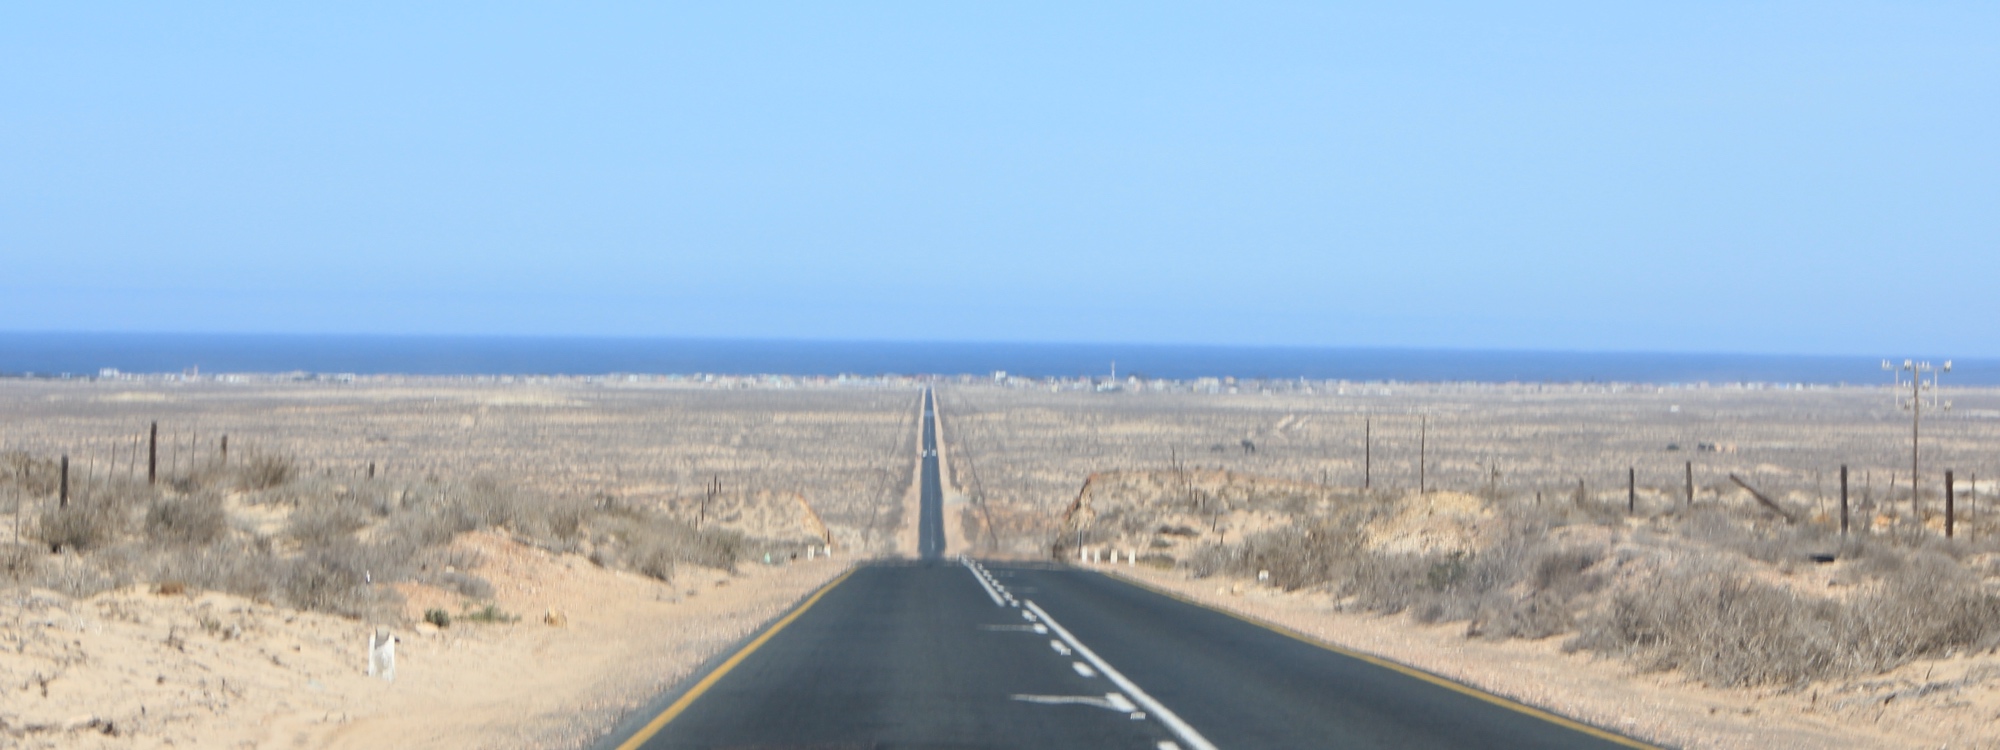 The road to Port Nolloth with the Atlantic Ocean in the background